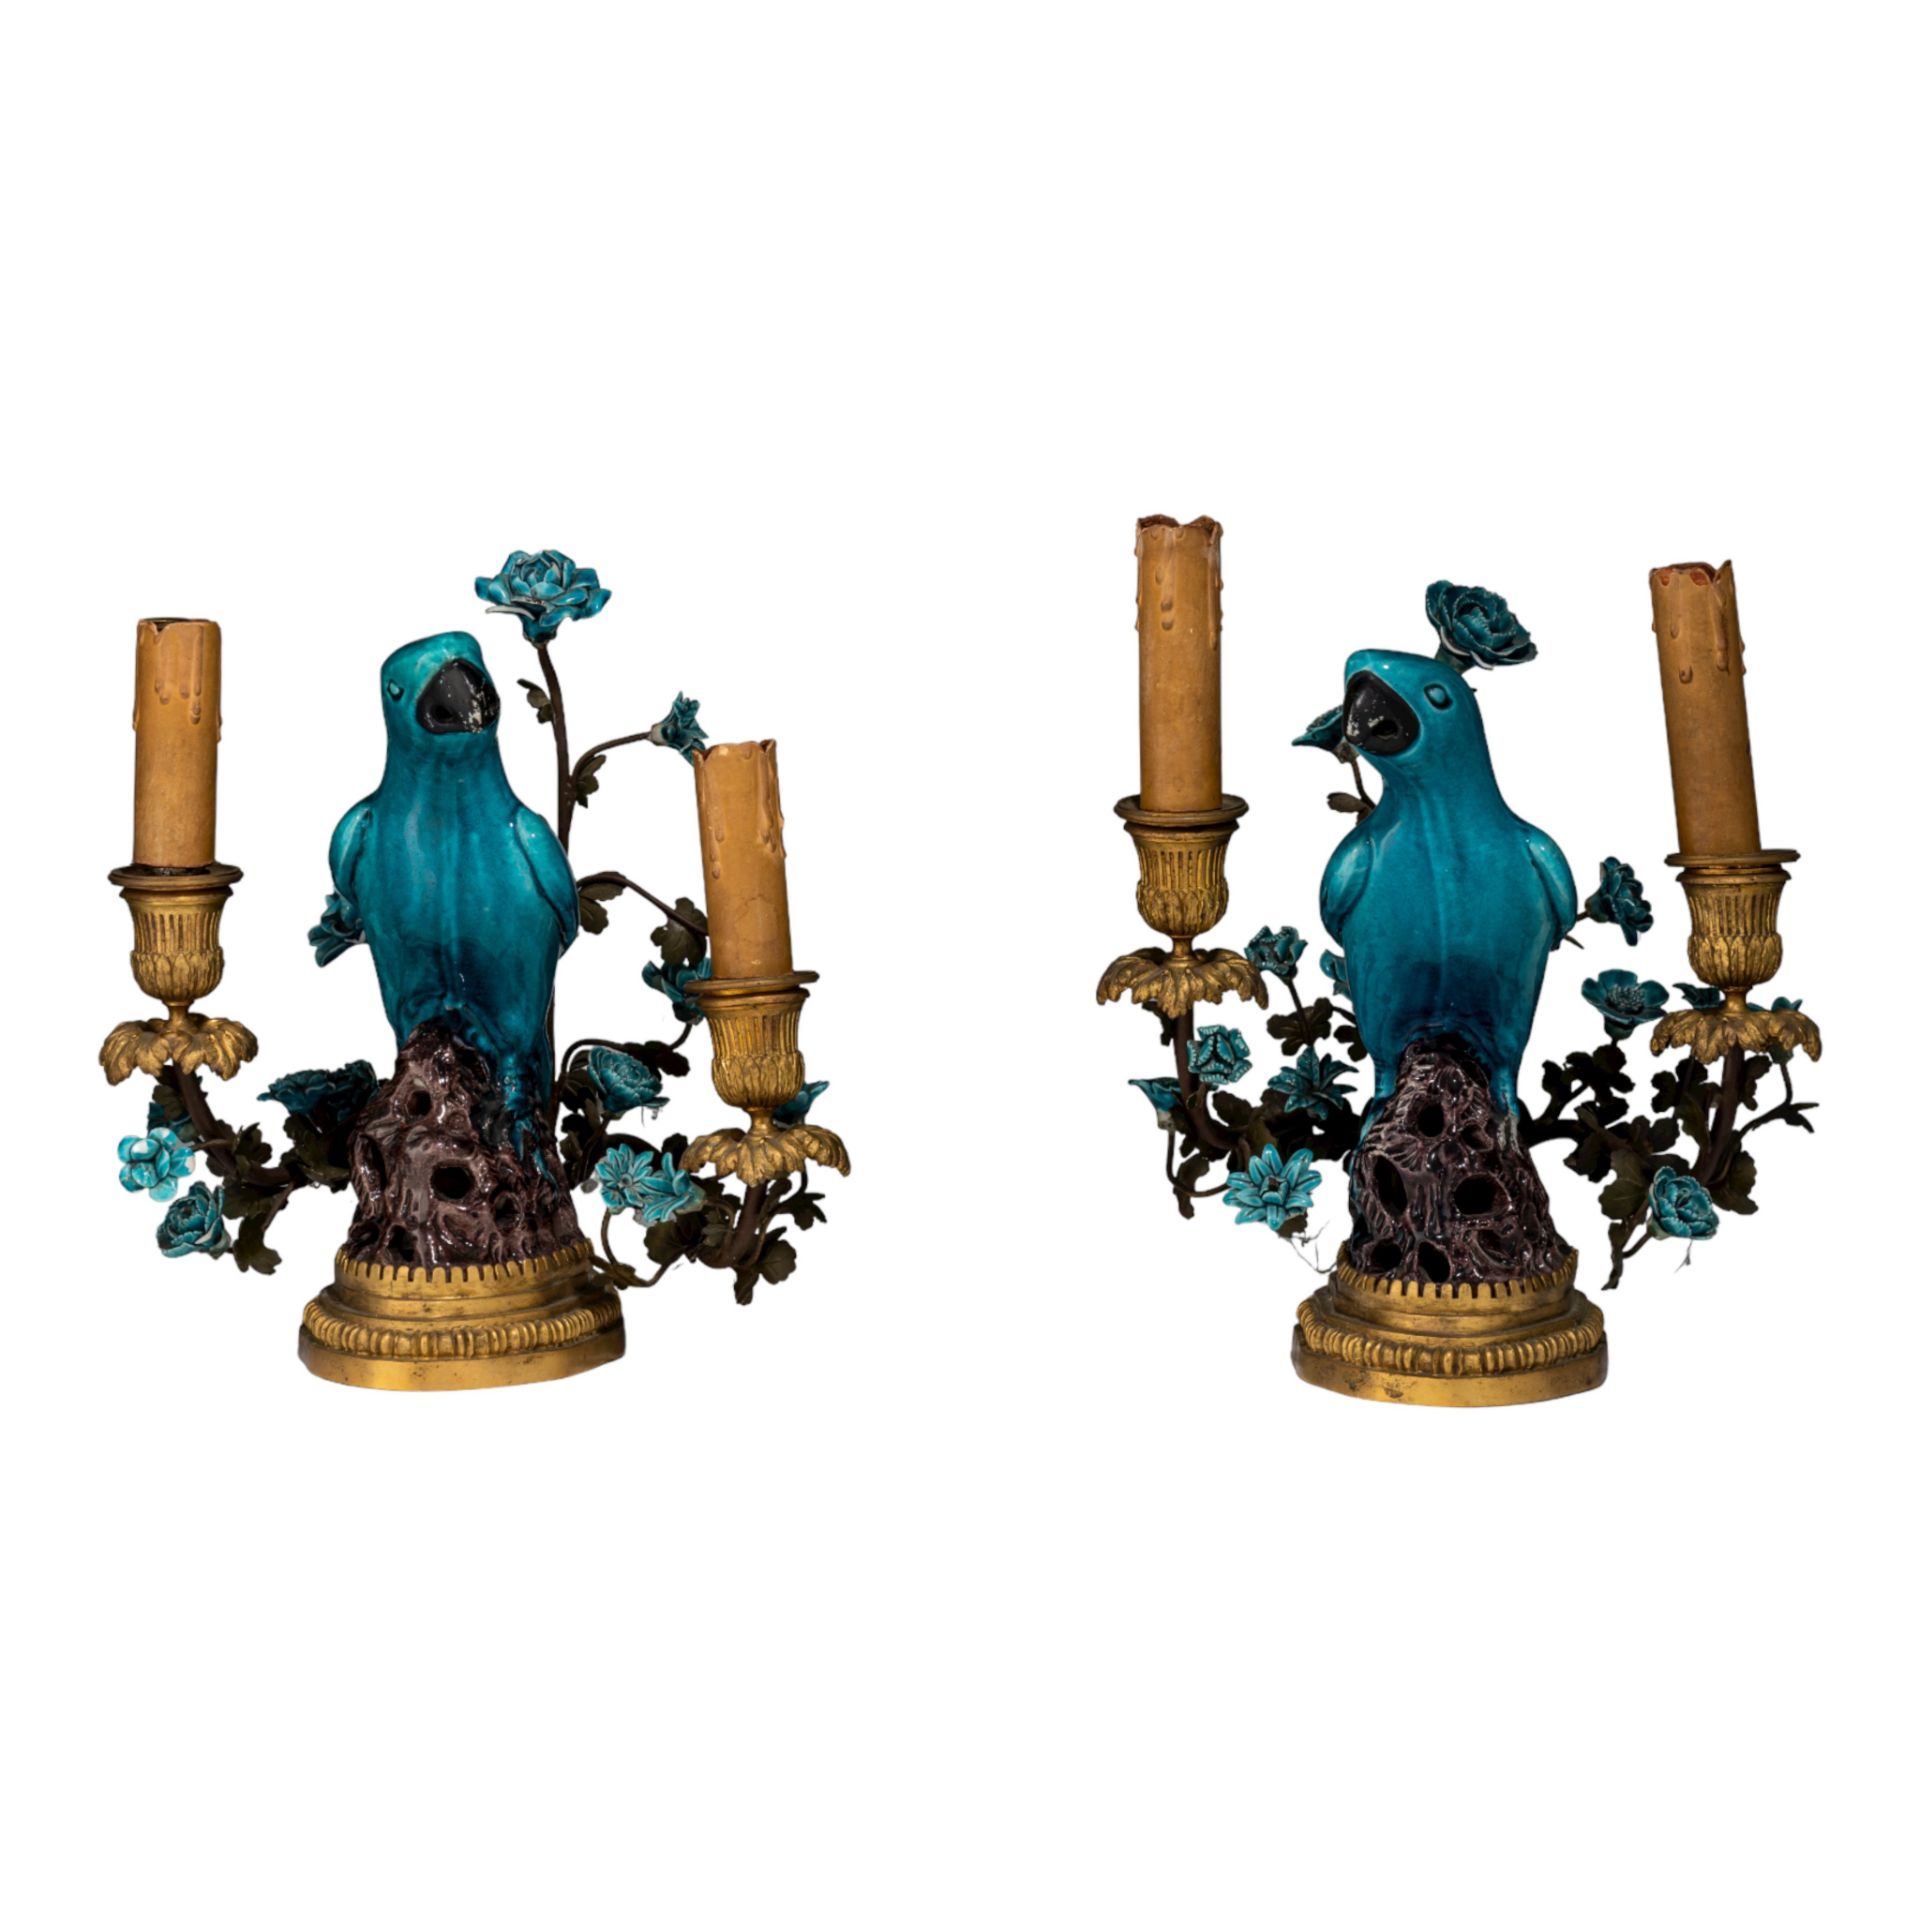 A pair of table lamps, brass-mounted porcelain parrots, marked Samson, late 19thC, H 26 - 28 cm - Image 2 of 12